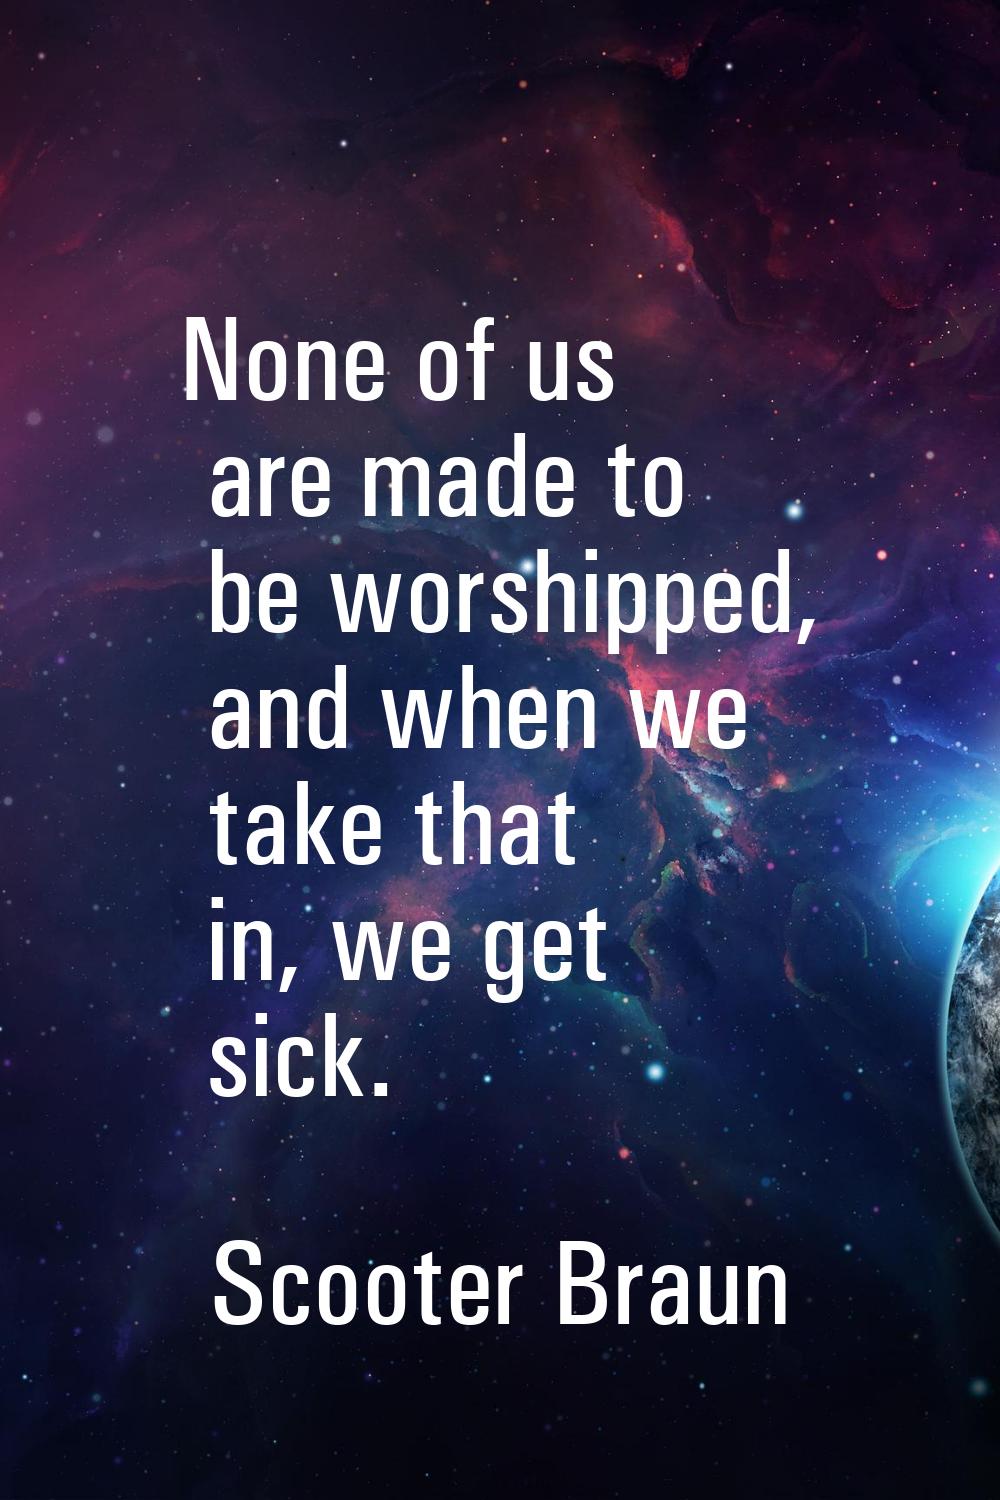 None of us are made to be worshipped, and when we take that in, we get sick.